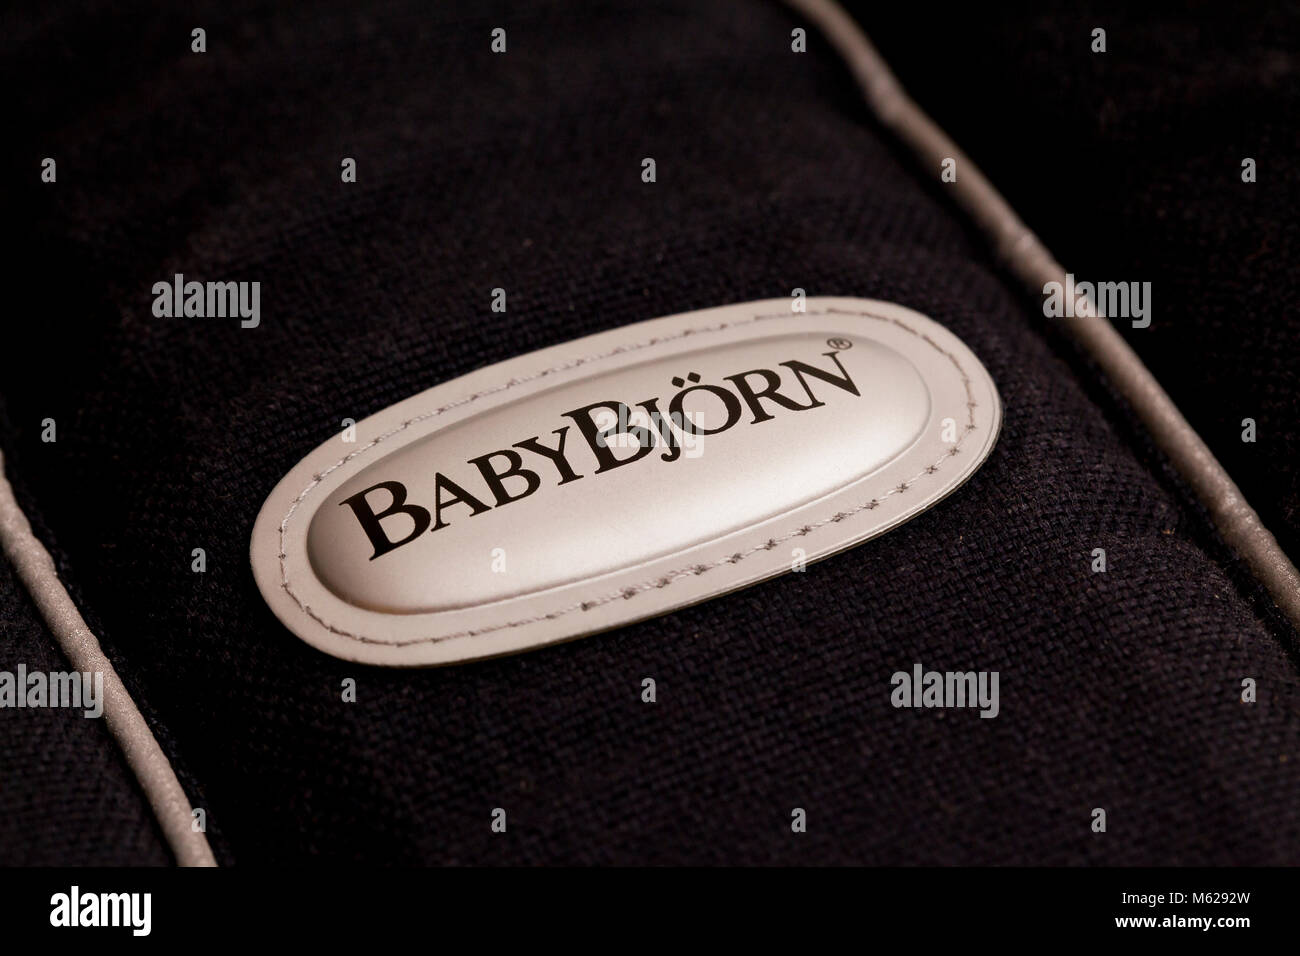 Baby Bjorn brand label on product Stock Photo